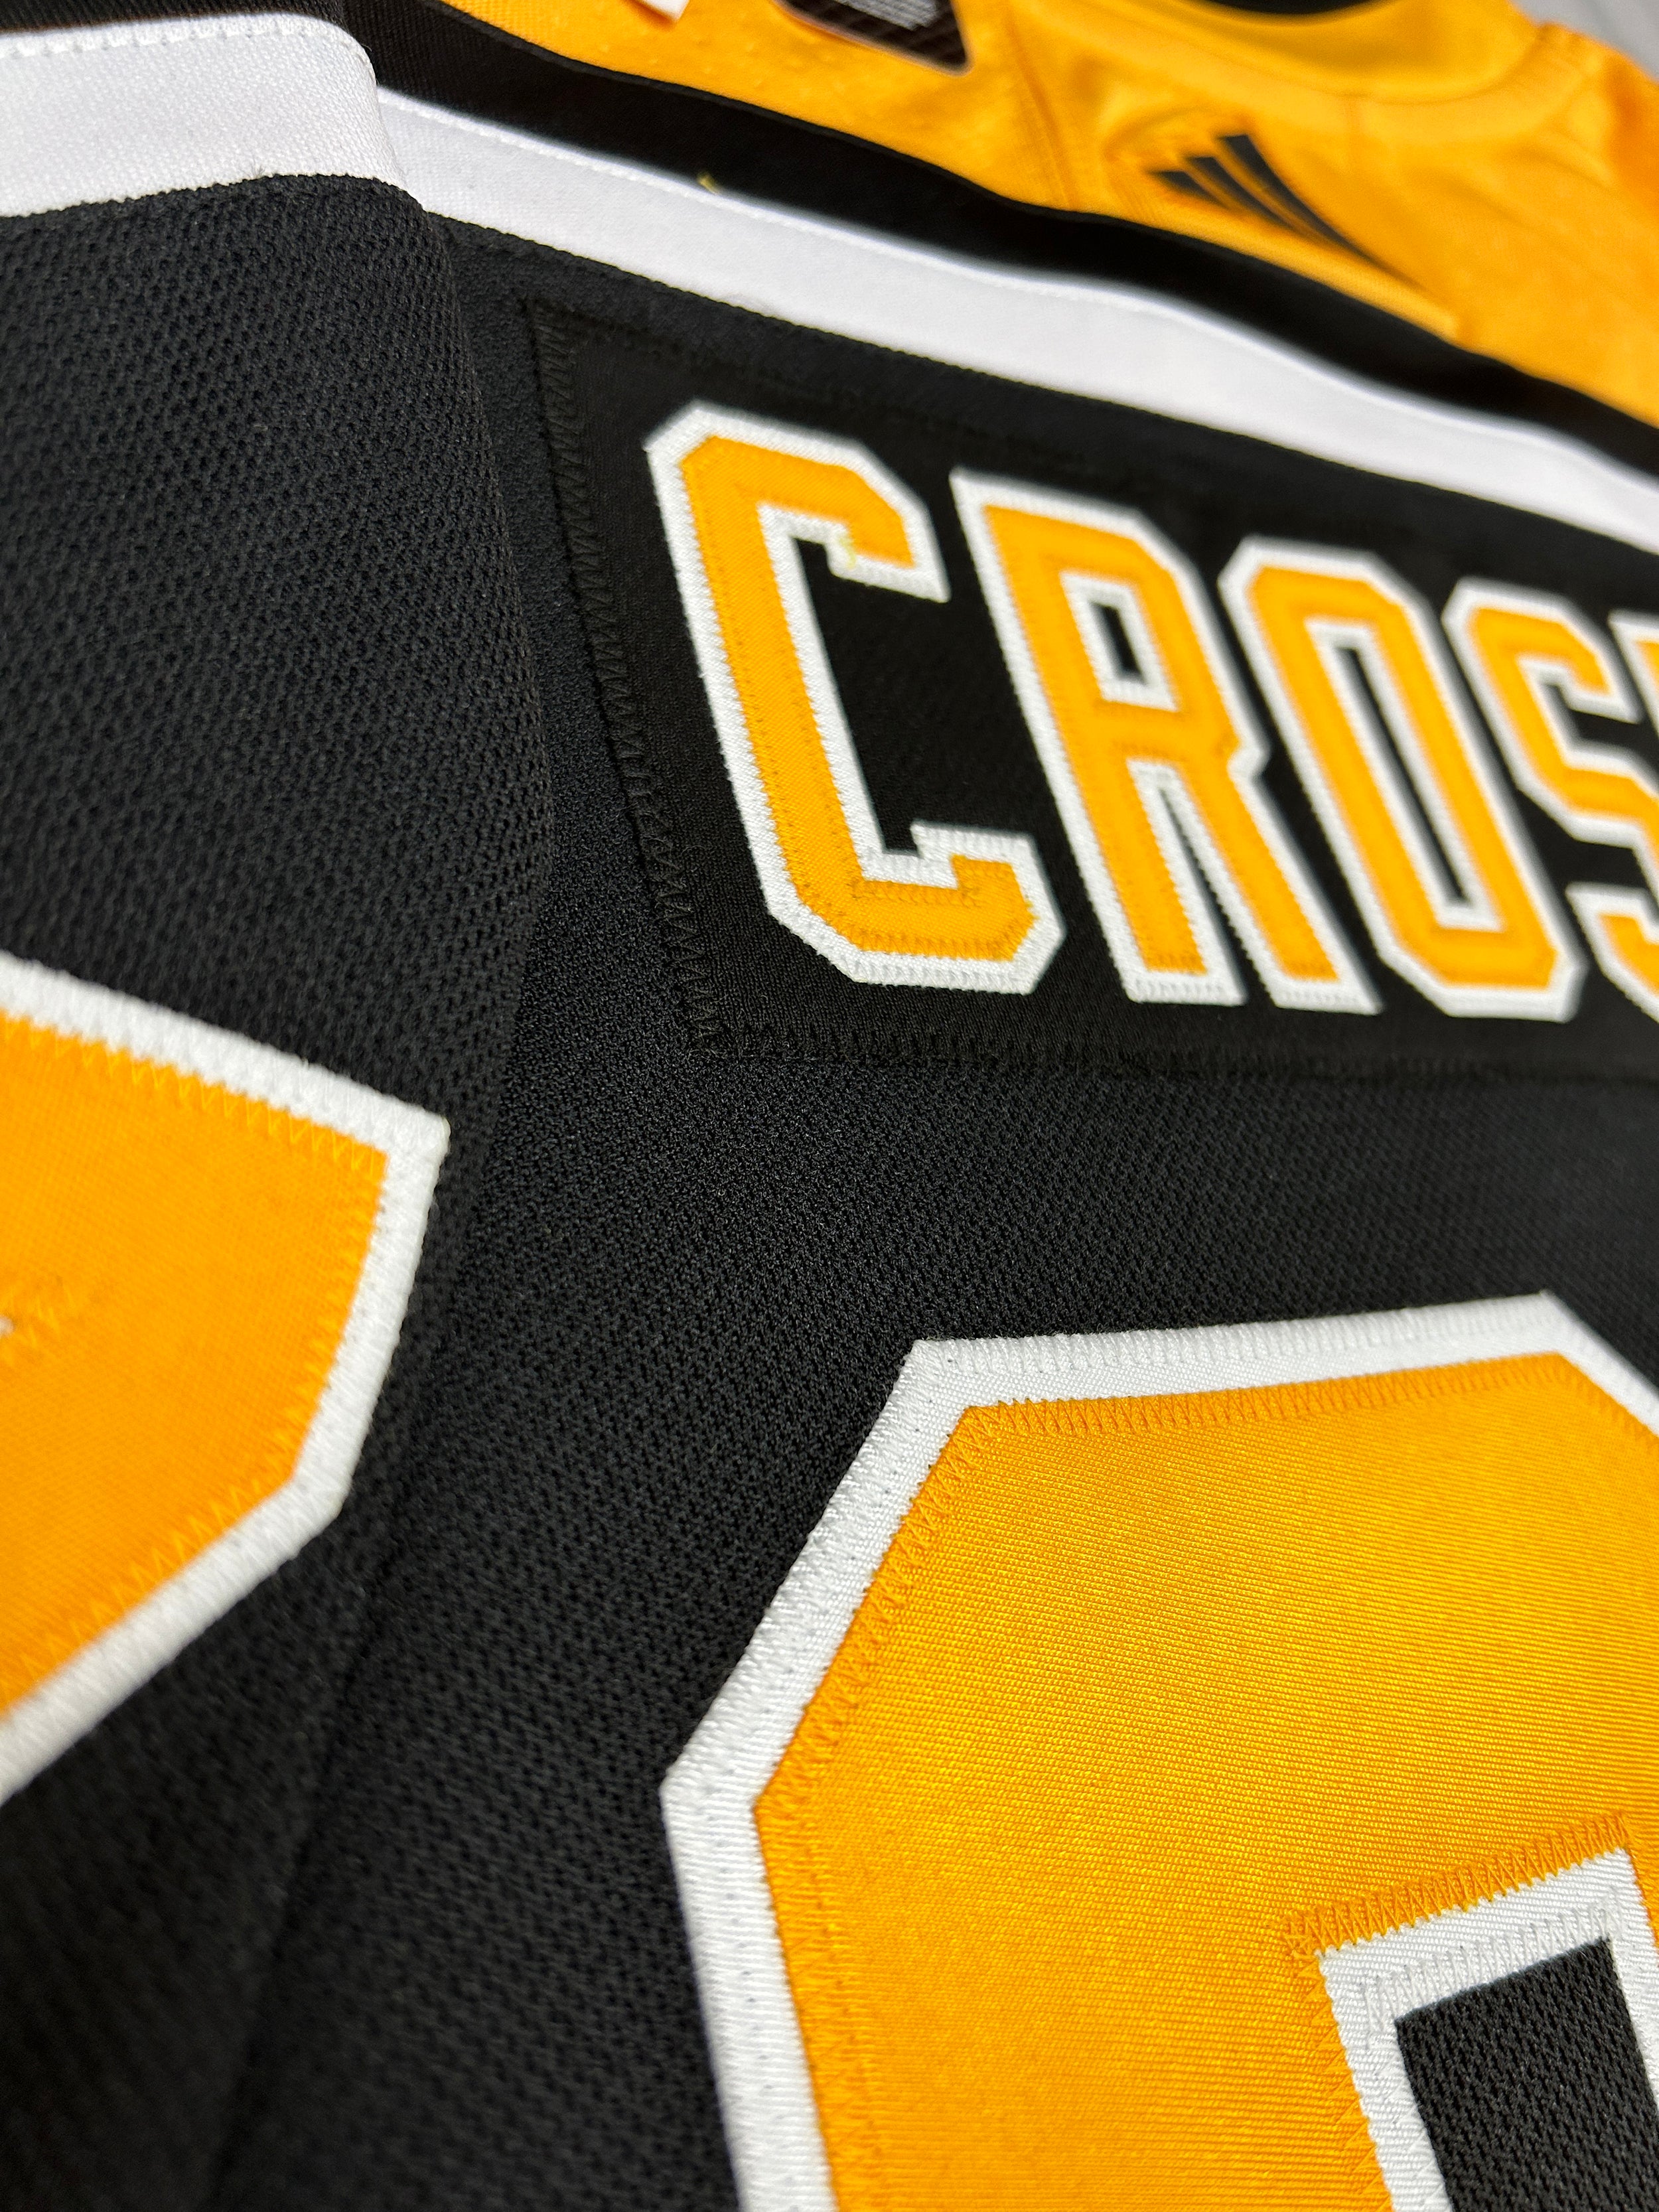 Pittsburgh Penguins to feature Robo Penguin on Reverse Retro jerseys